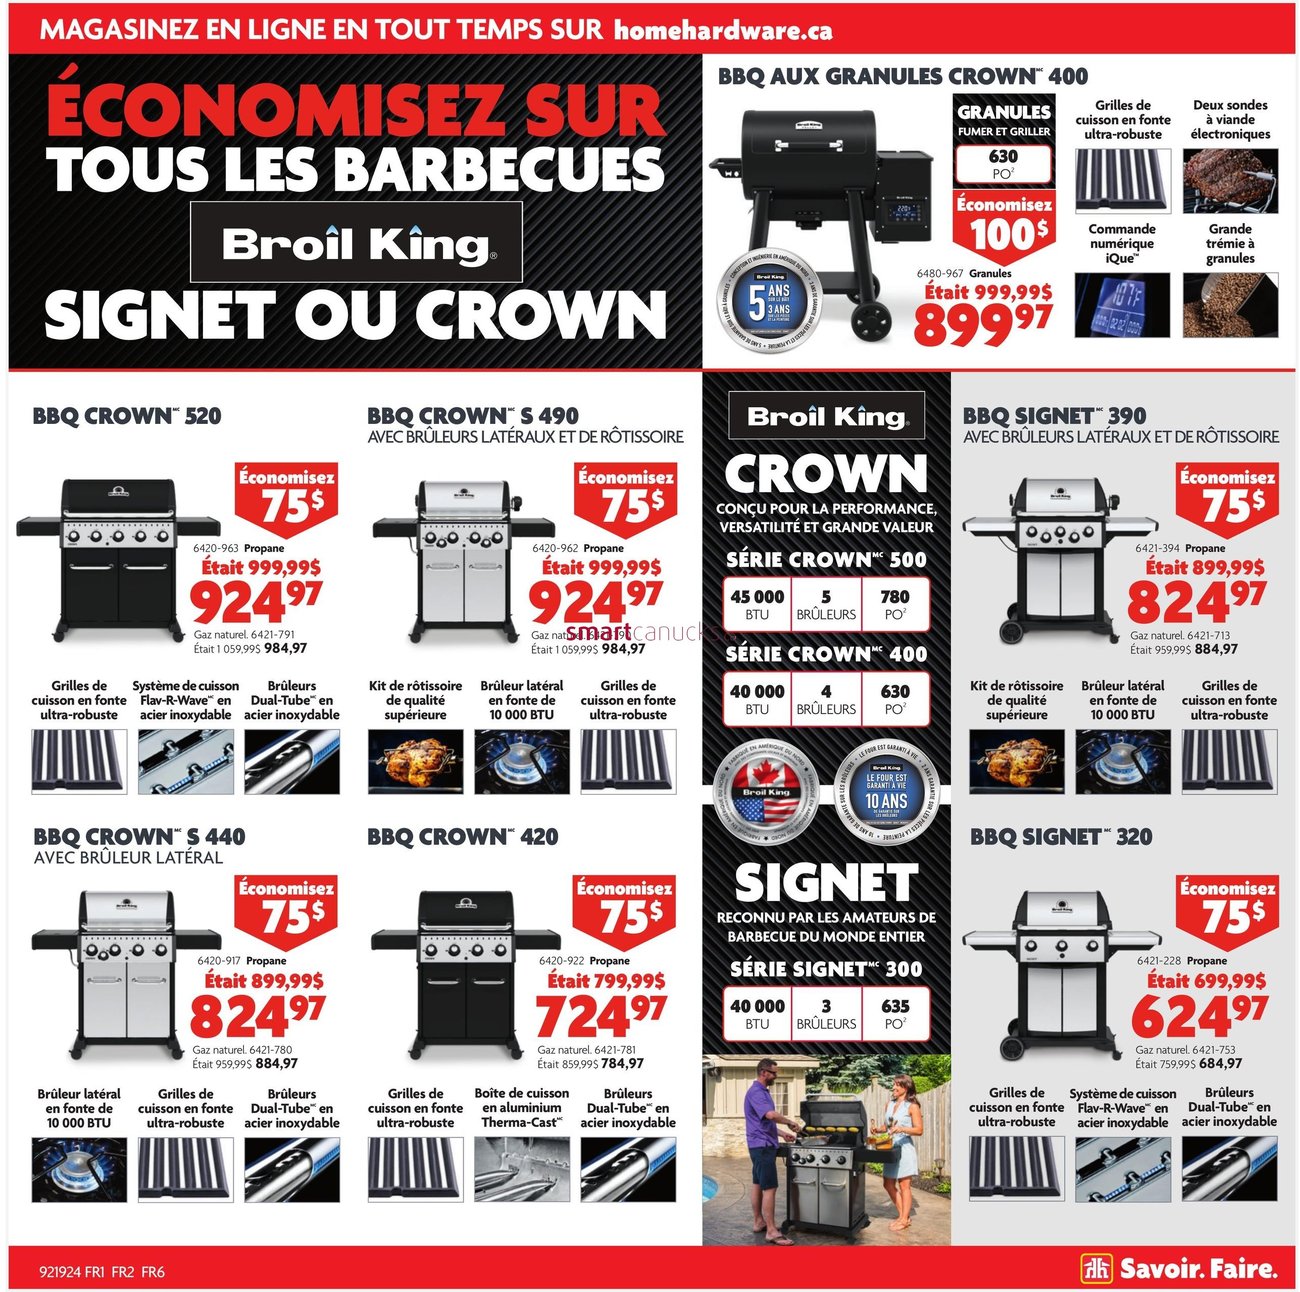 Home Hardware Building Centre - Quebec - 2 Weeks of Savings - Page 8